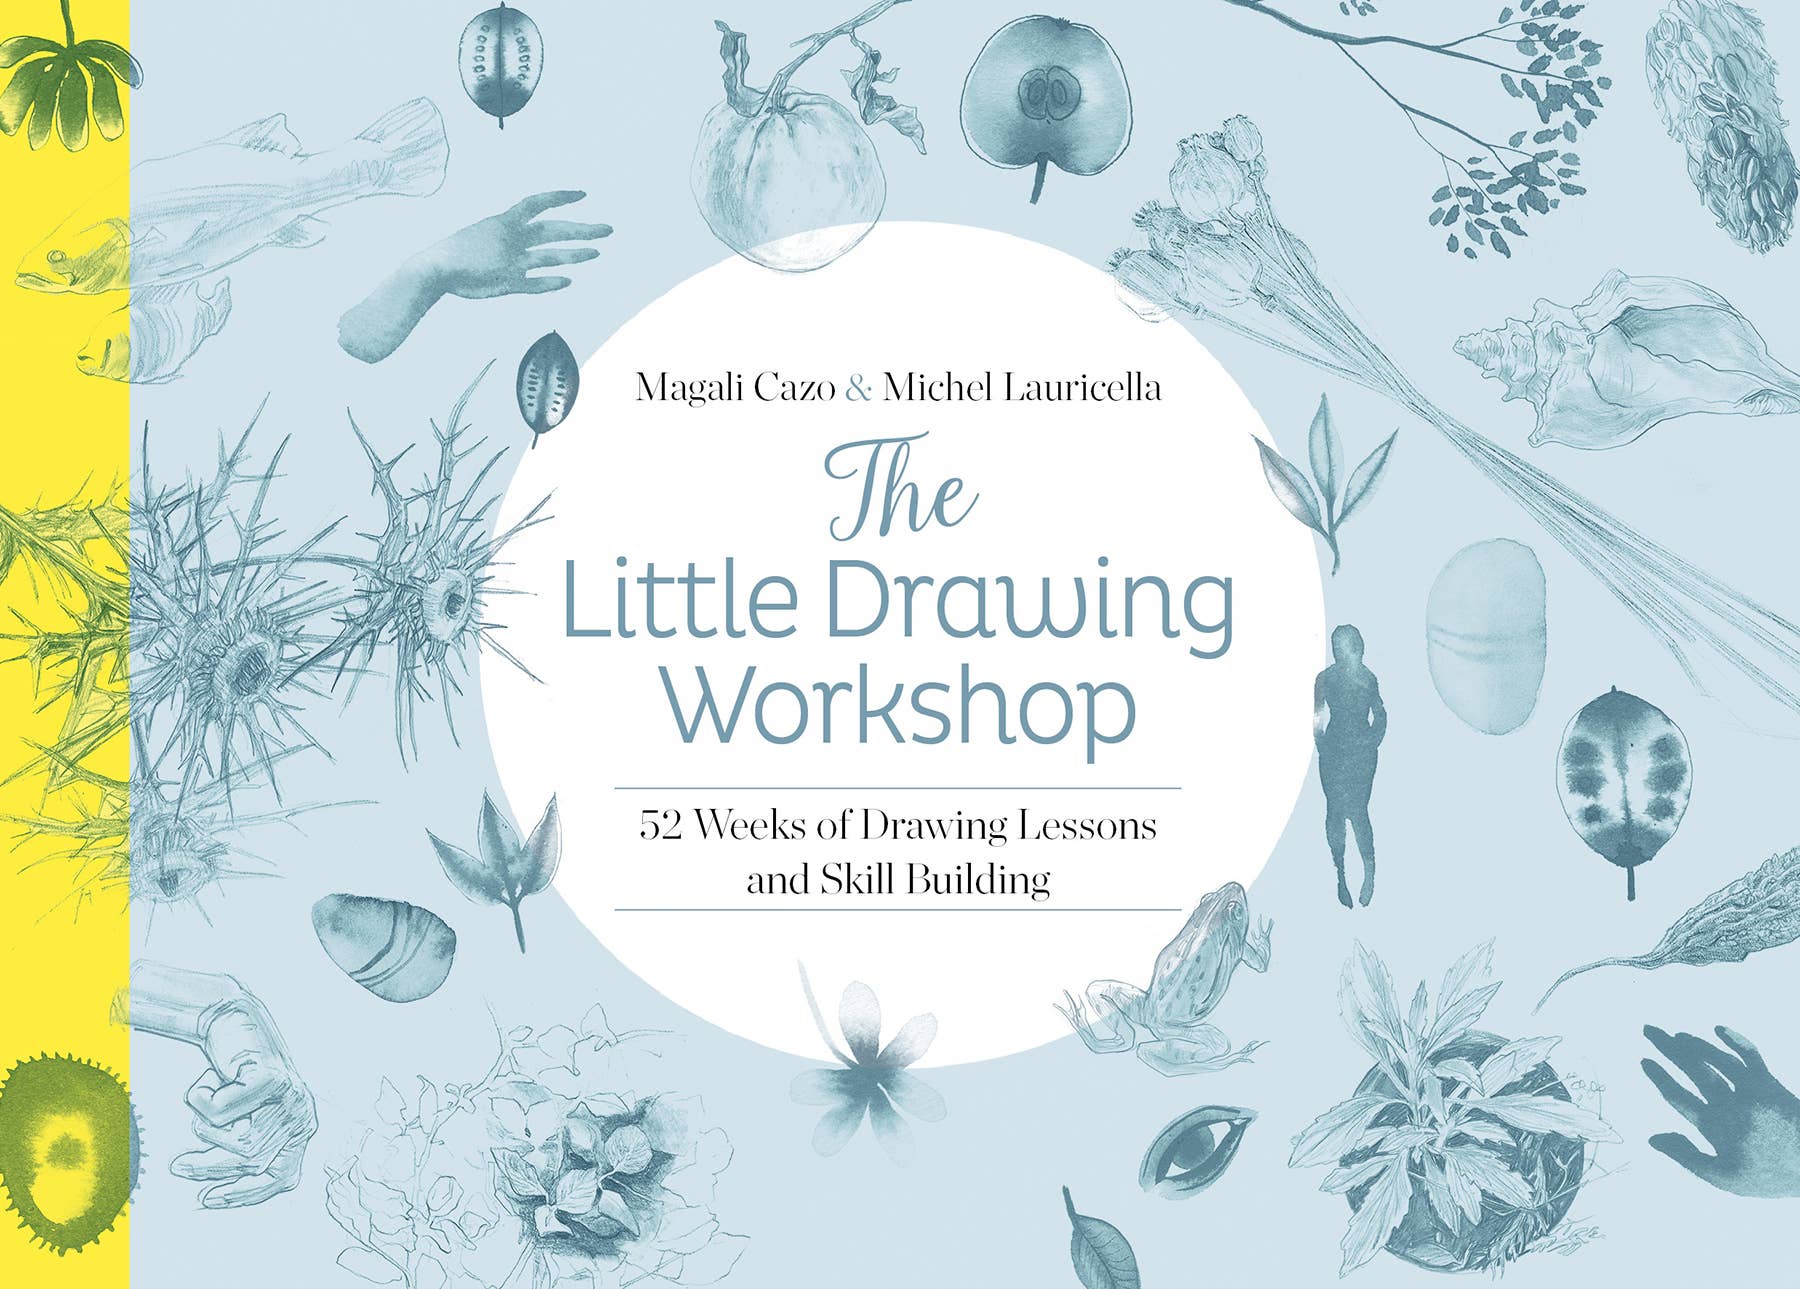 Schiffer Publishing - The Little Drawing Workshop: 52 Weeks of Drawing Lessons